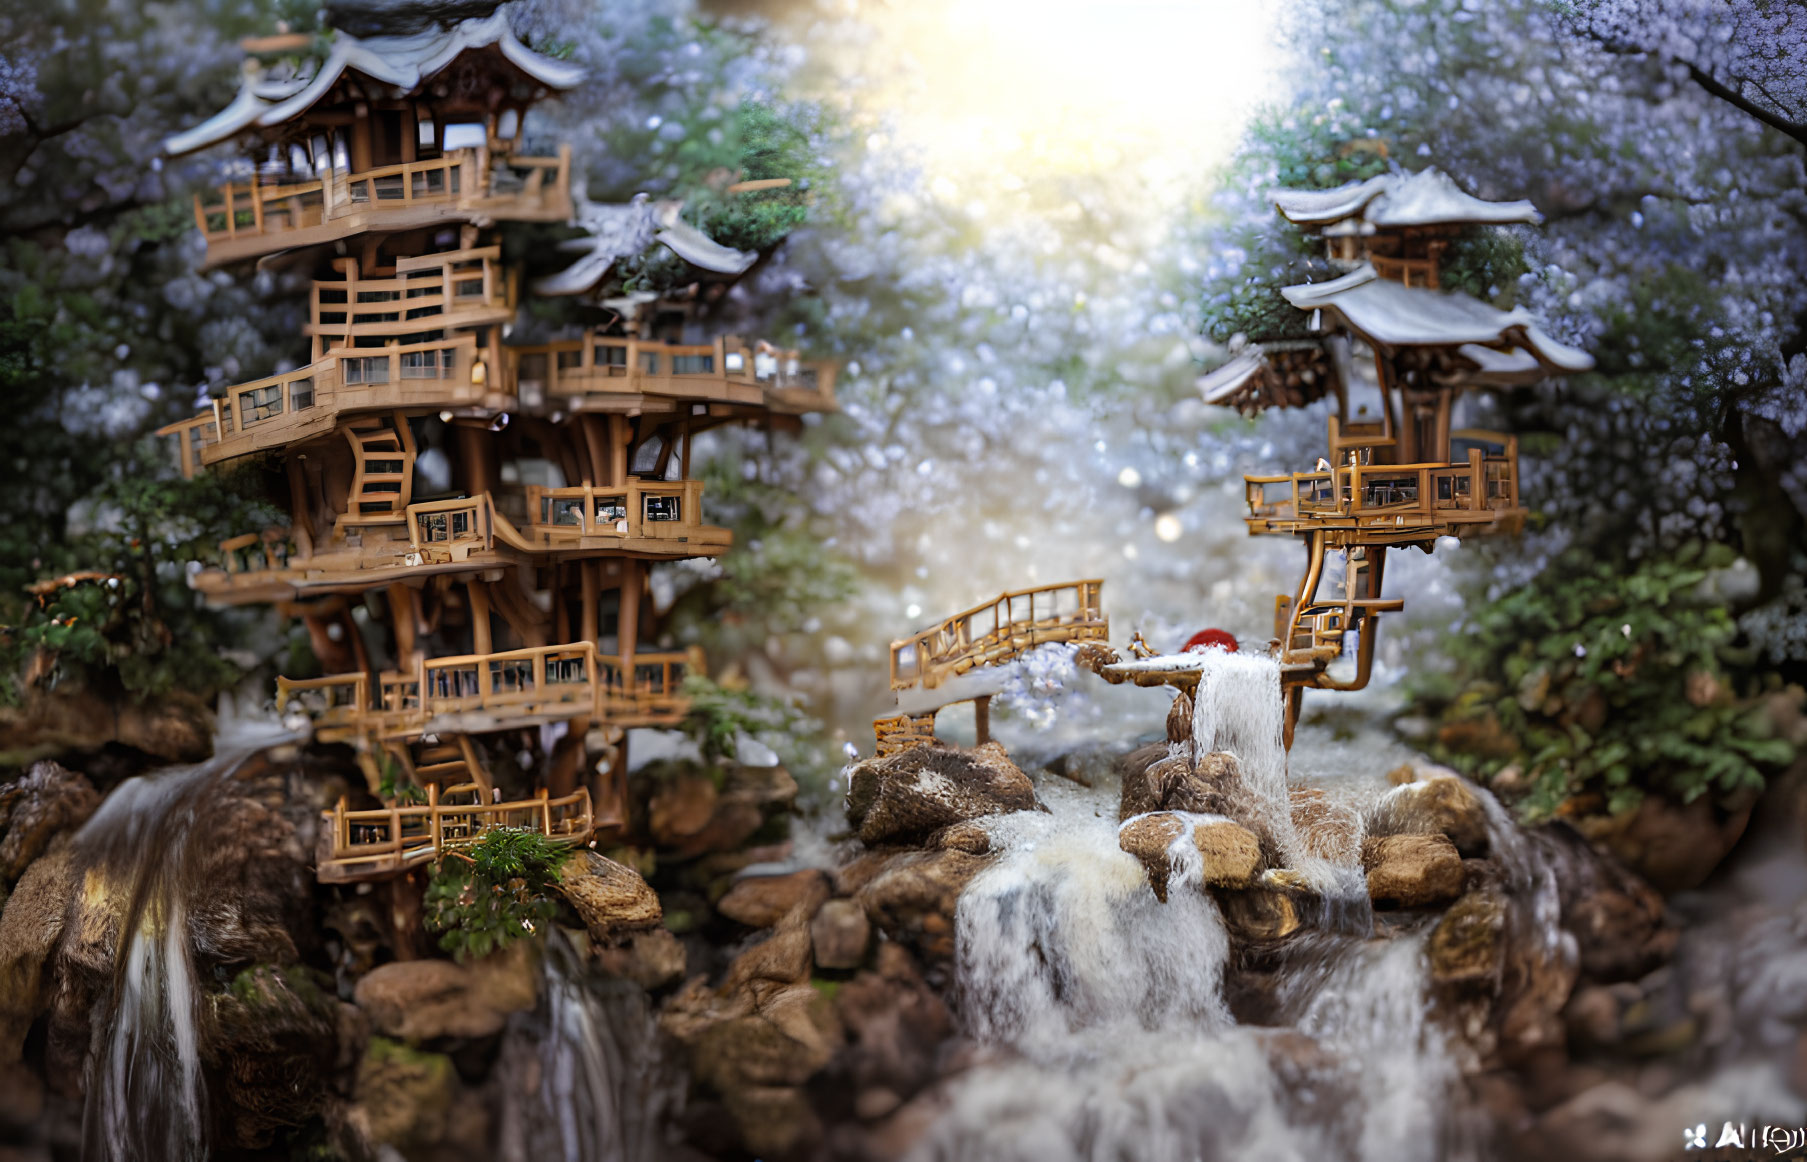 Miniature landscape with wooden treehouses, cherry blossoms, rocks, and waterfalls under glowing light